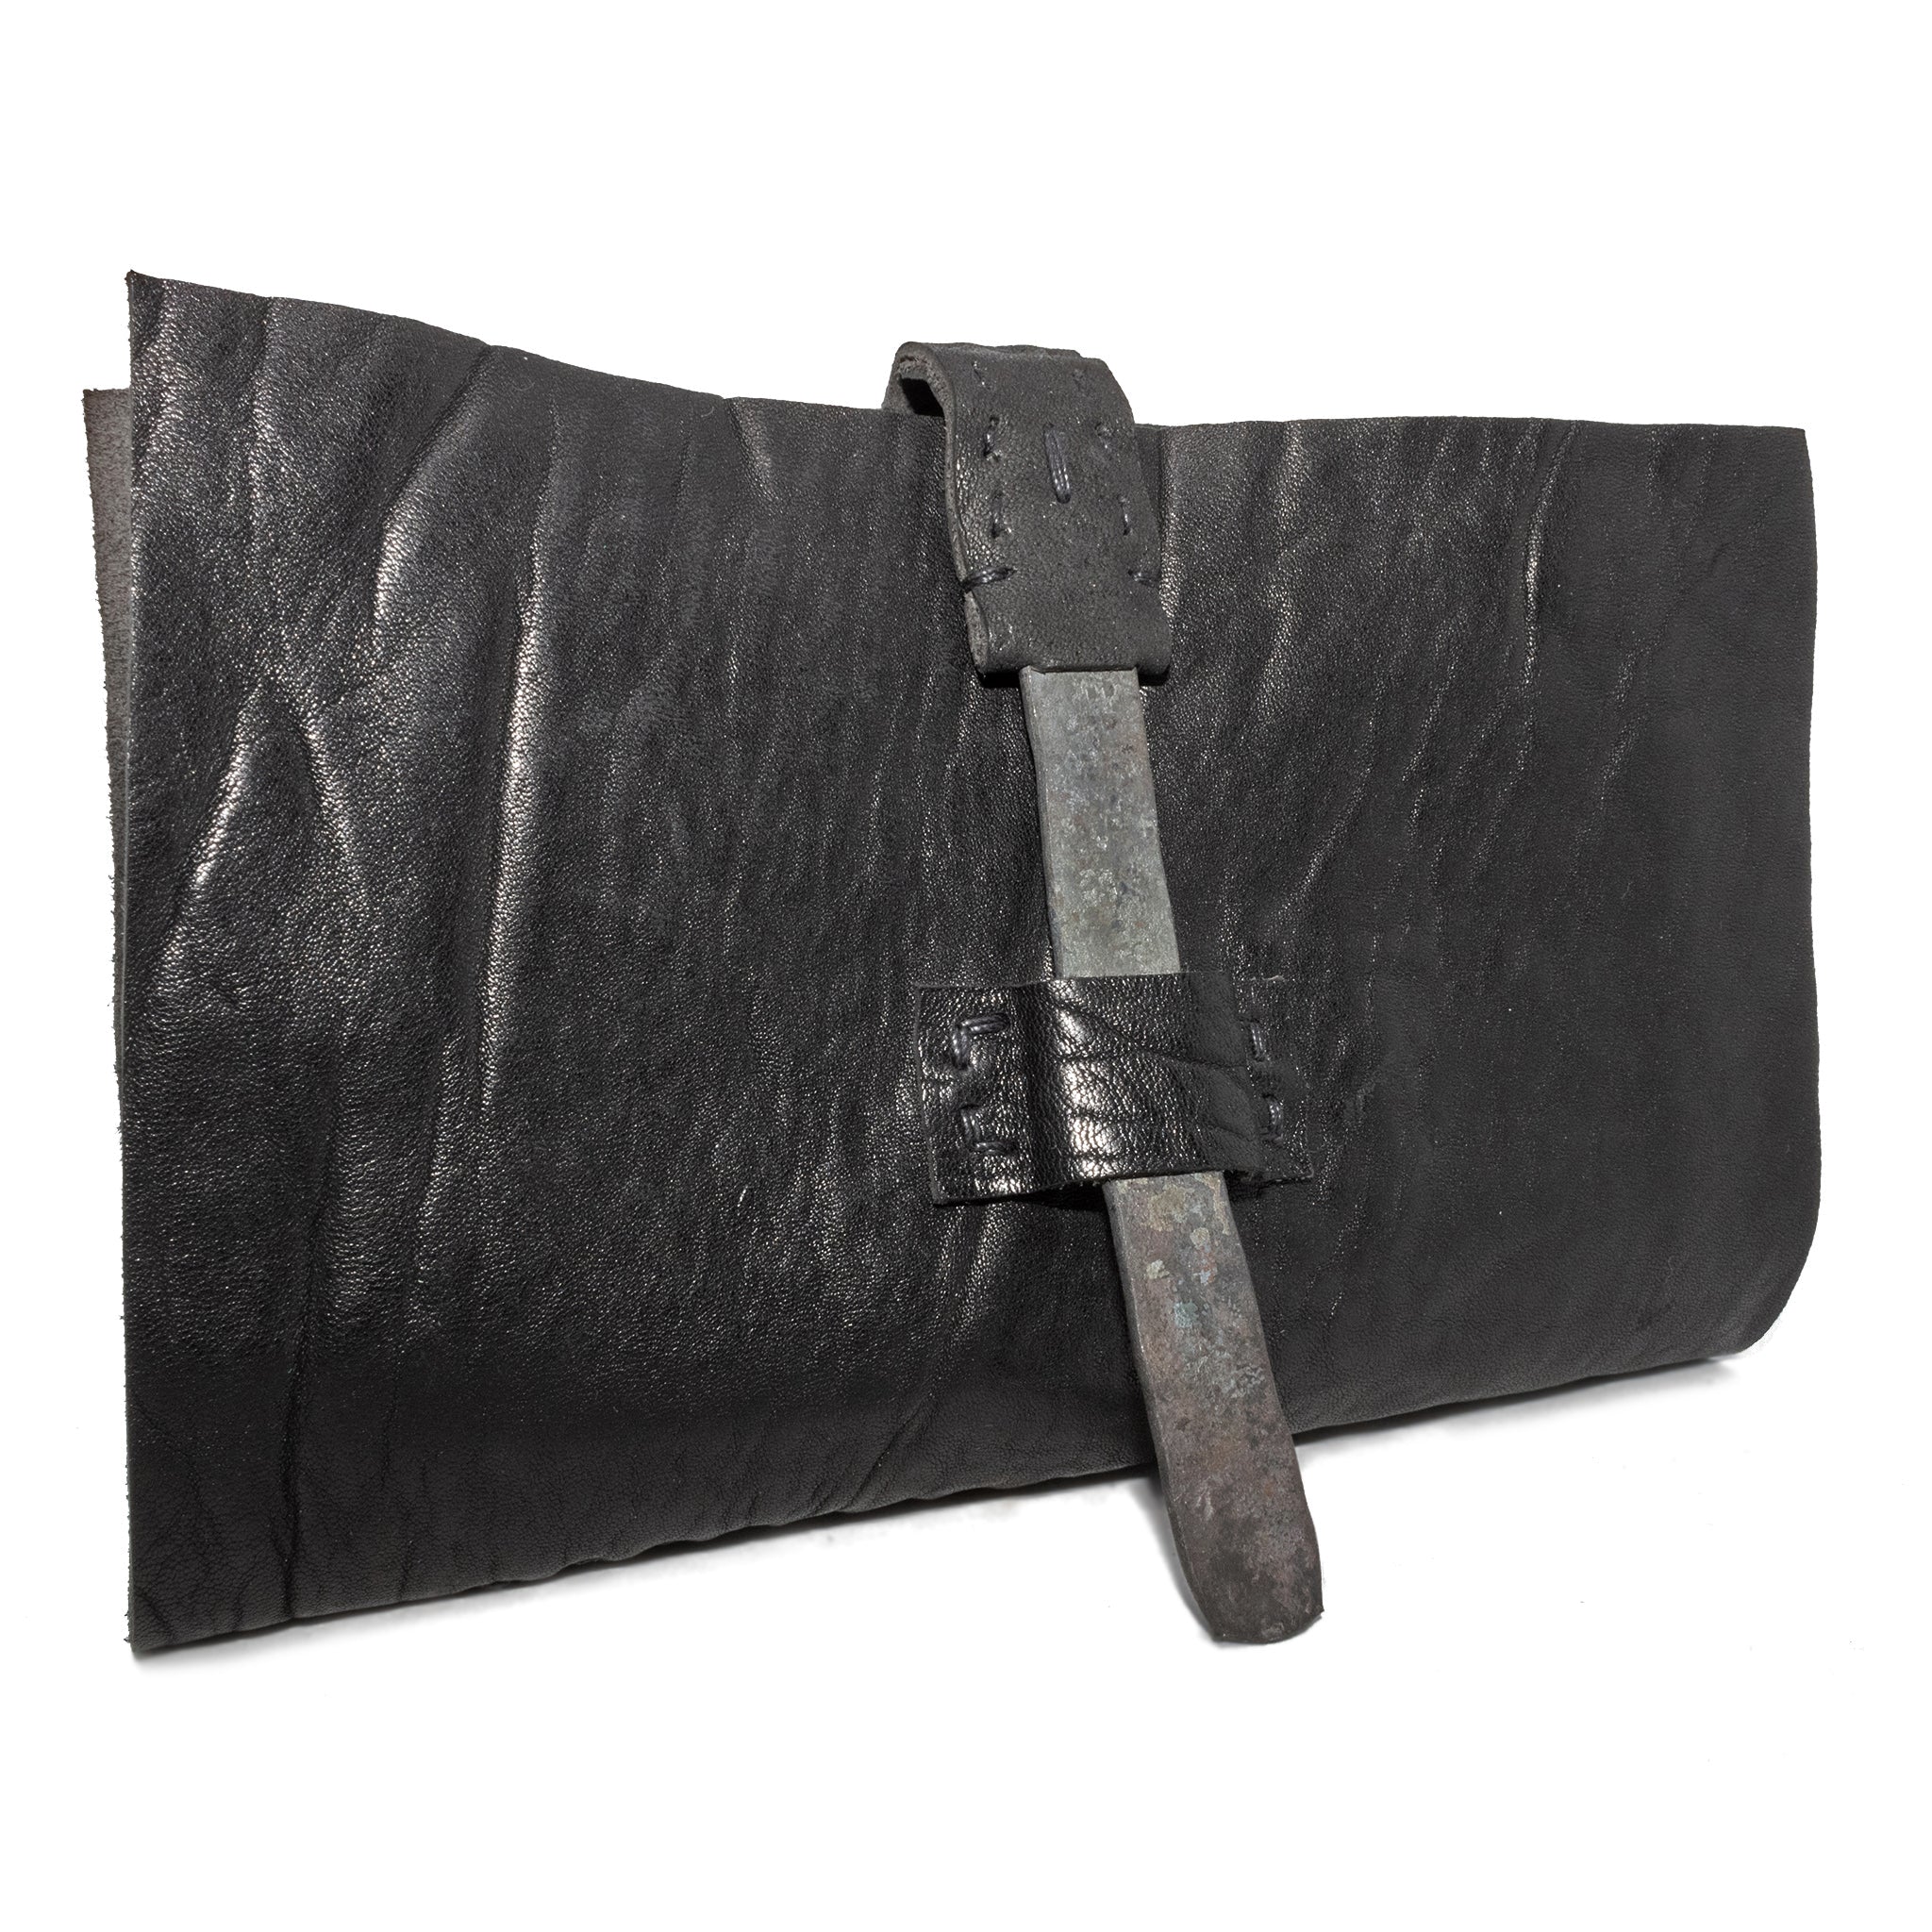 avant garde hand sewn horse leather bags, belts, wallets and accessories | atelier skn